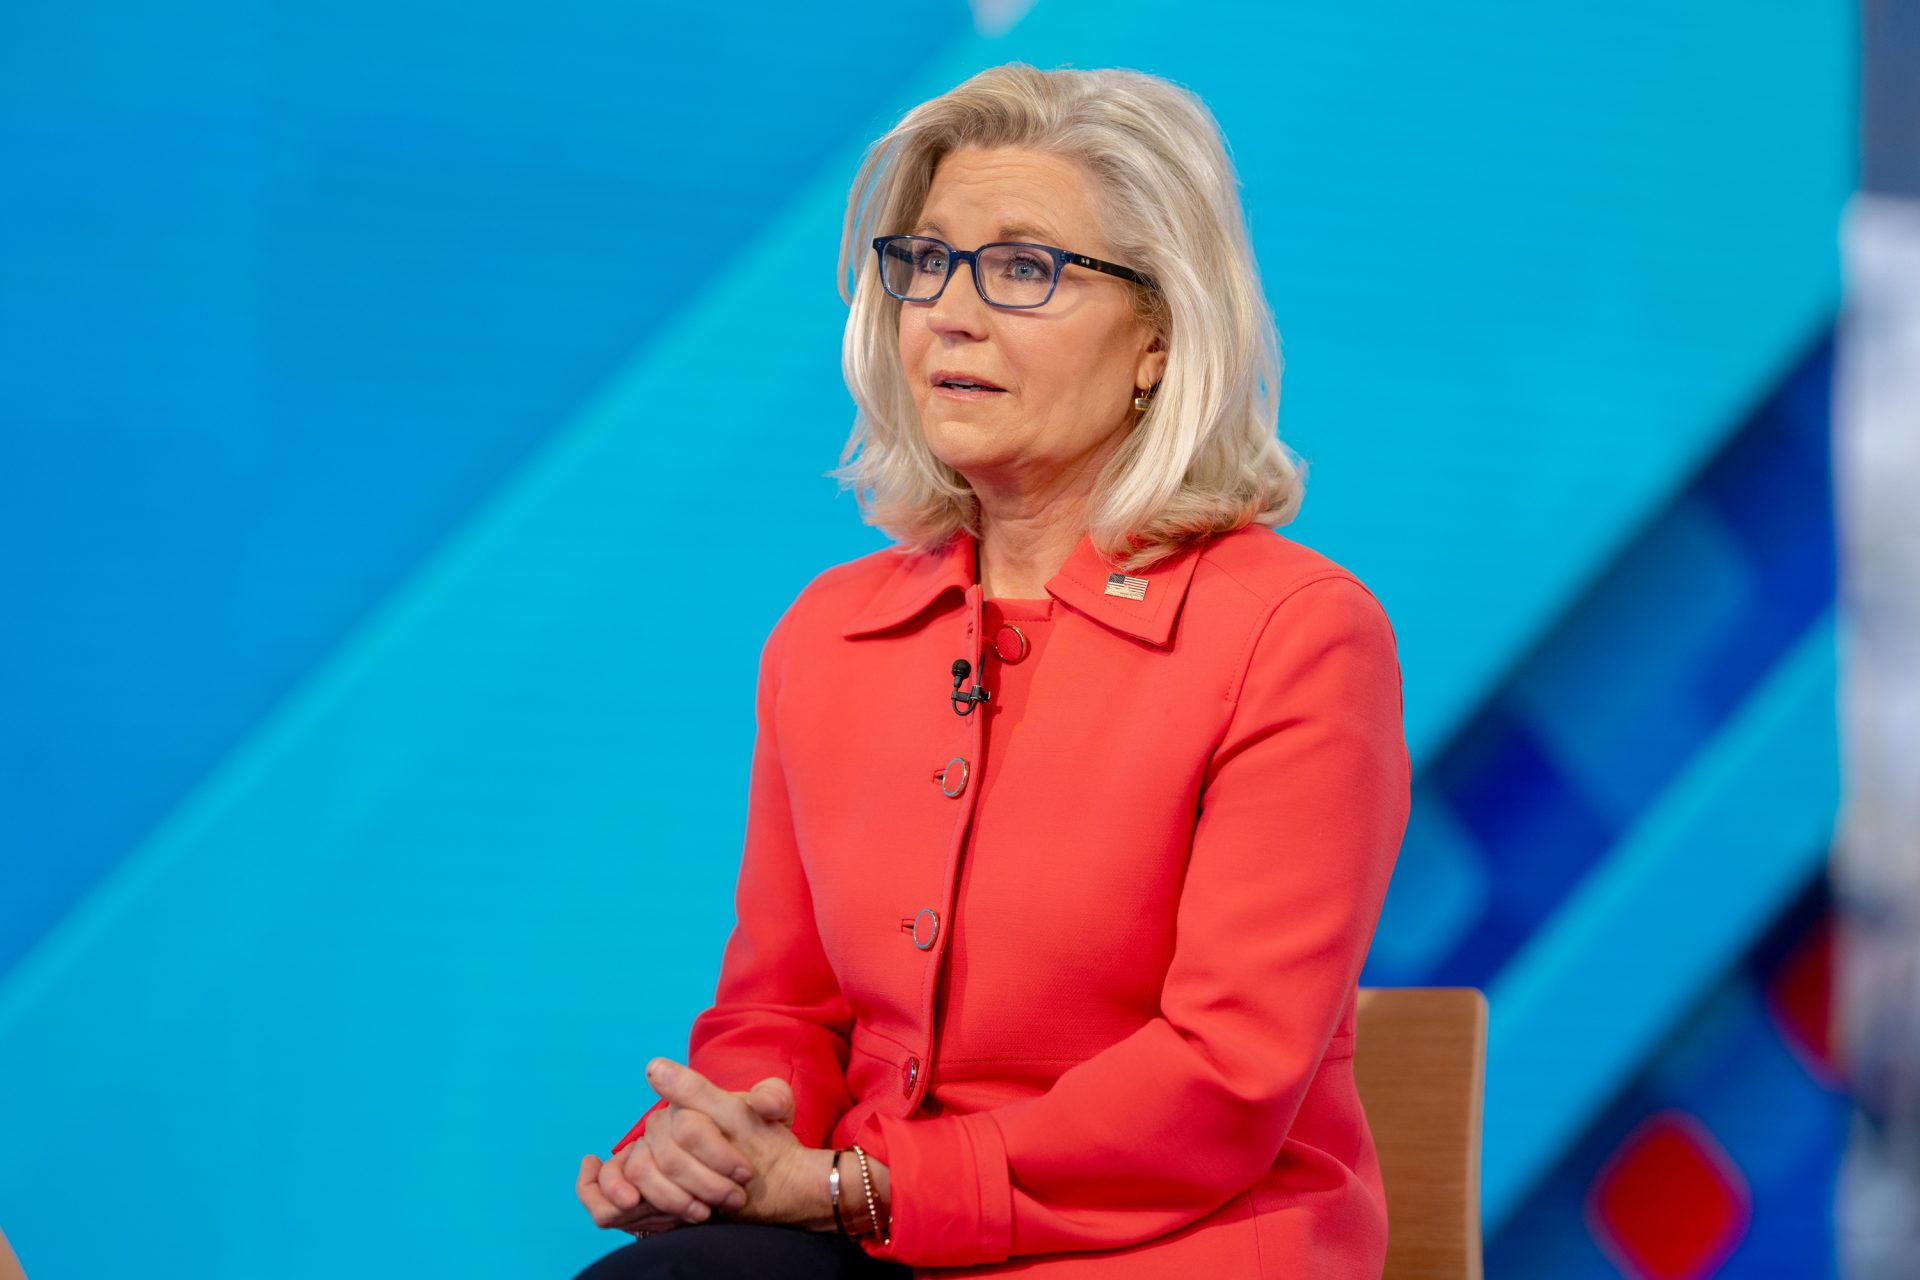 Taking a long look at Liz Cheney